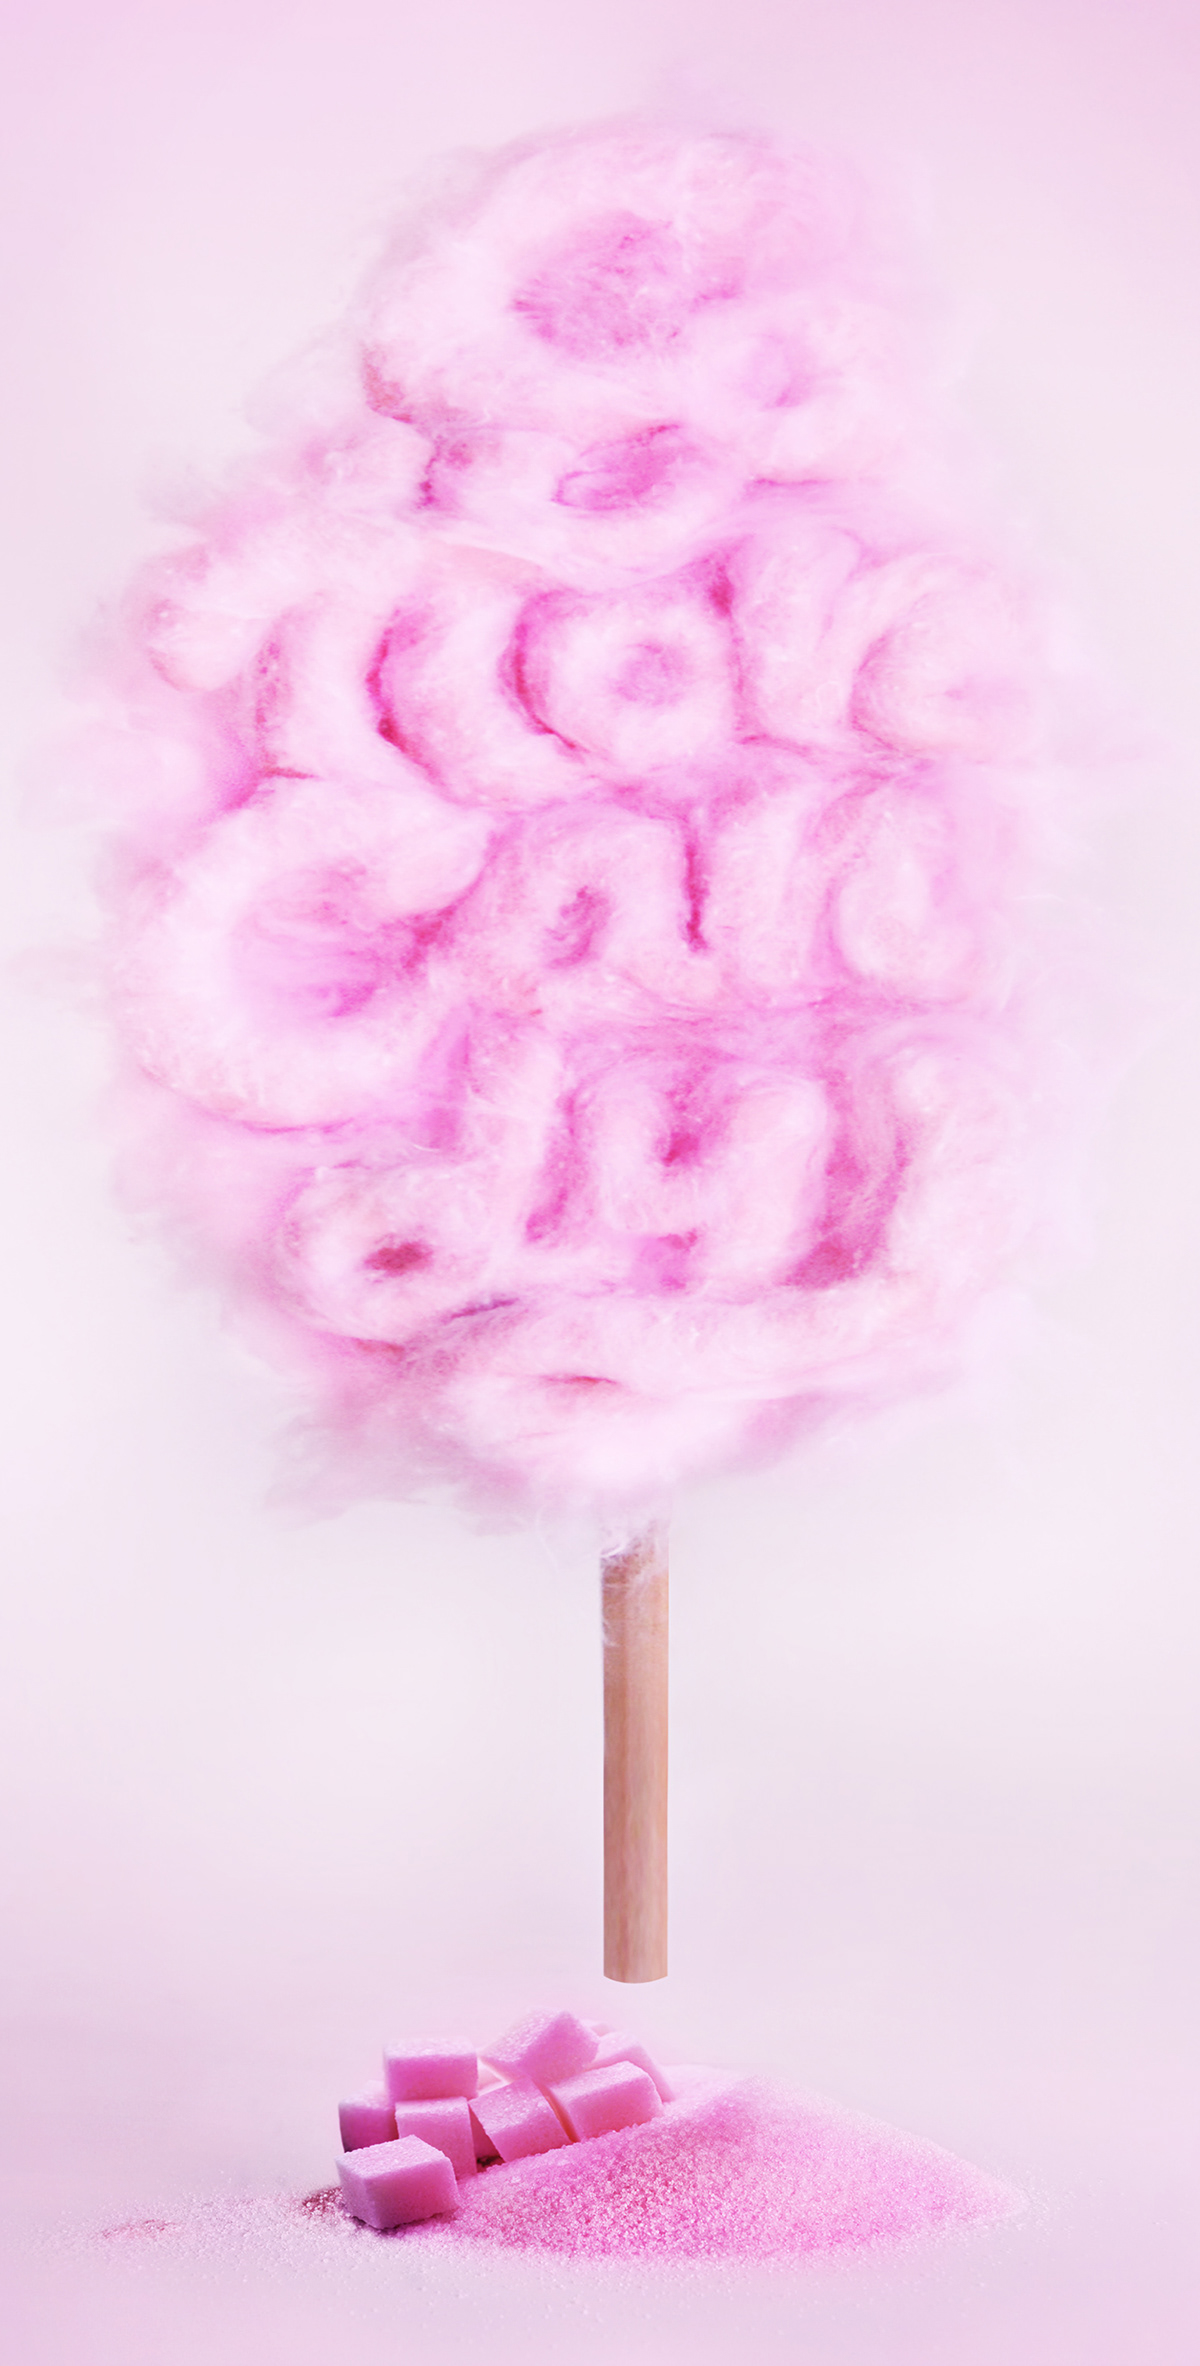 Adobe Portfolio ice cream bubblegum Chewinggum cotton candy Candy cotton Sweets lettering handcrafted materials play Food  gum